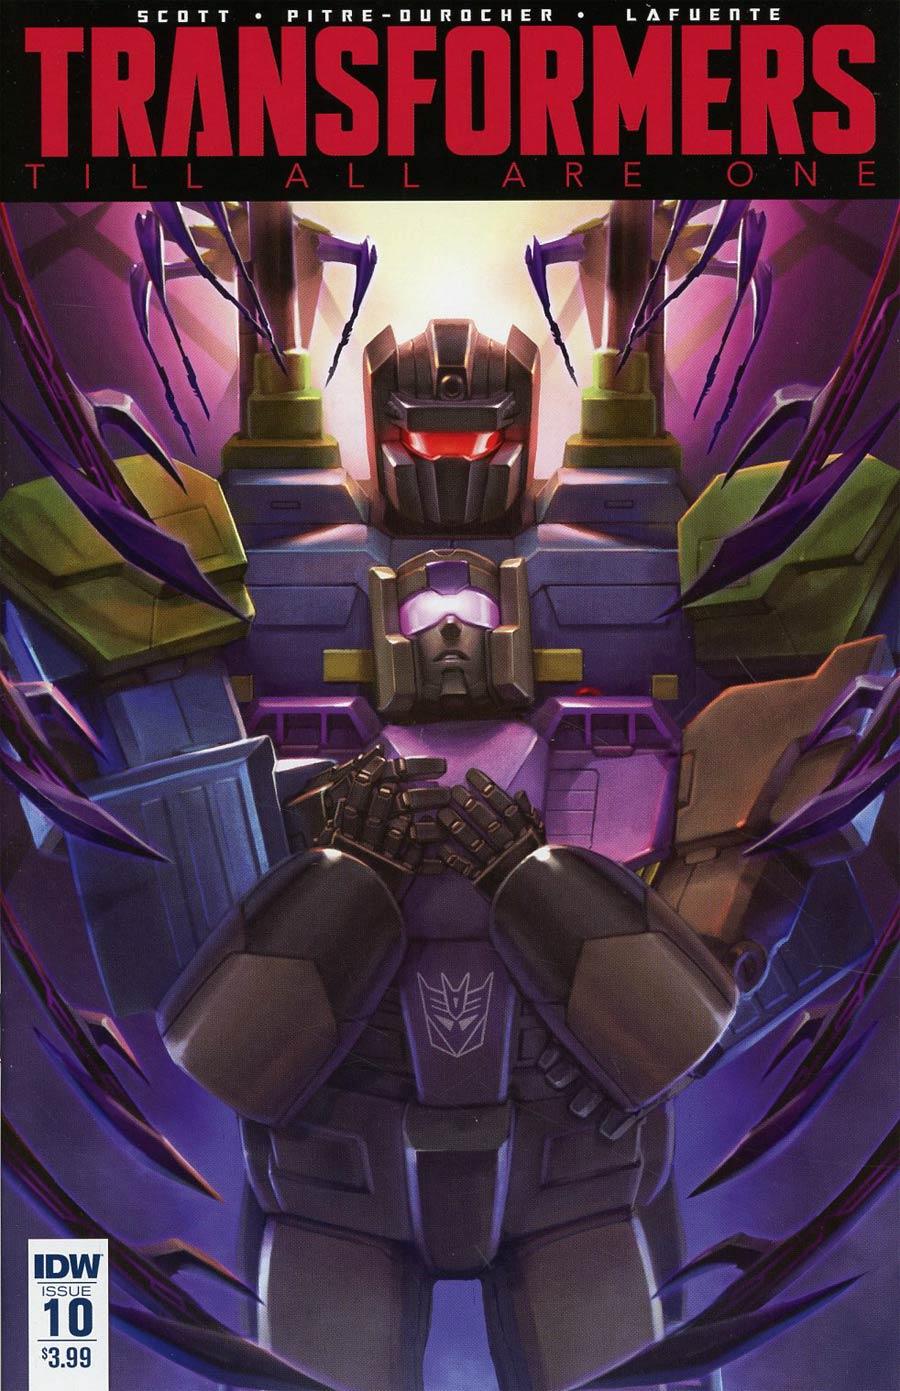 Transformers Till All Are One Vol. 1 #10